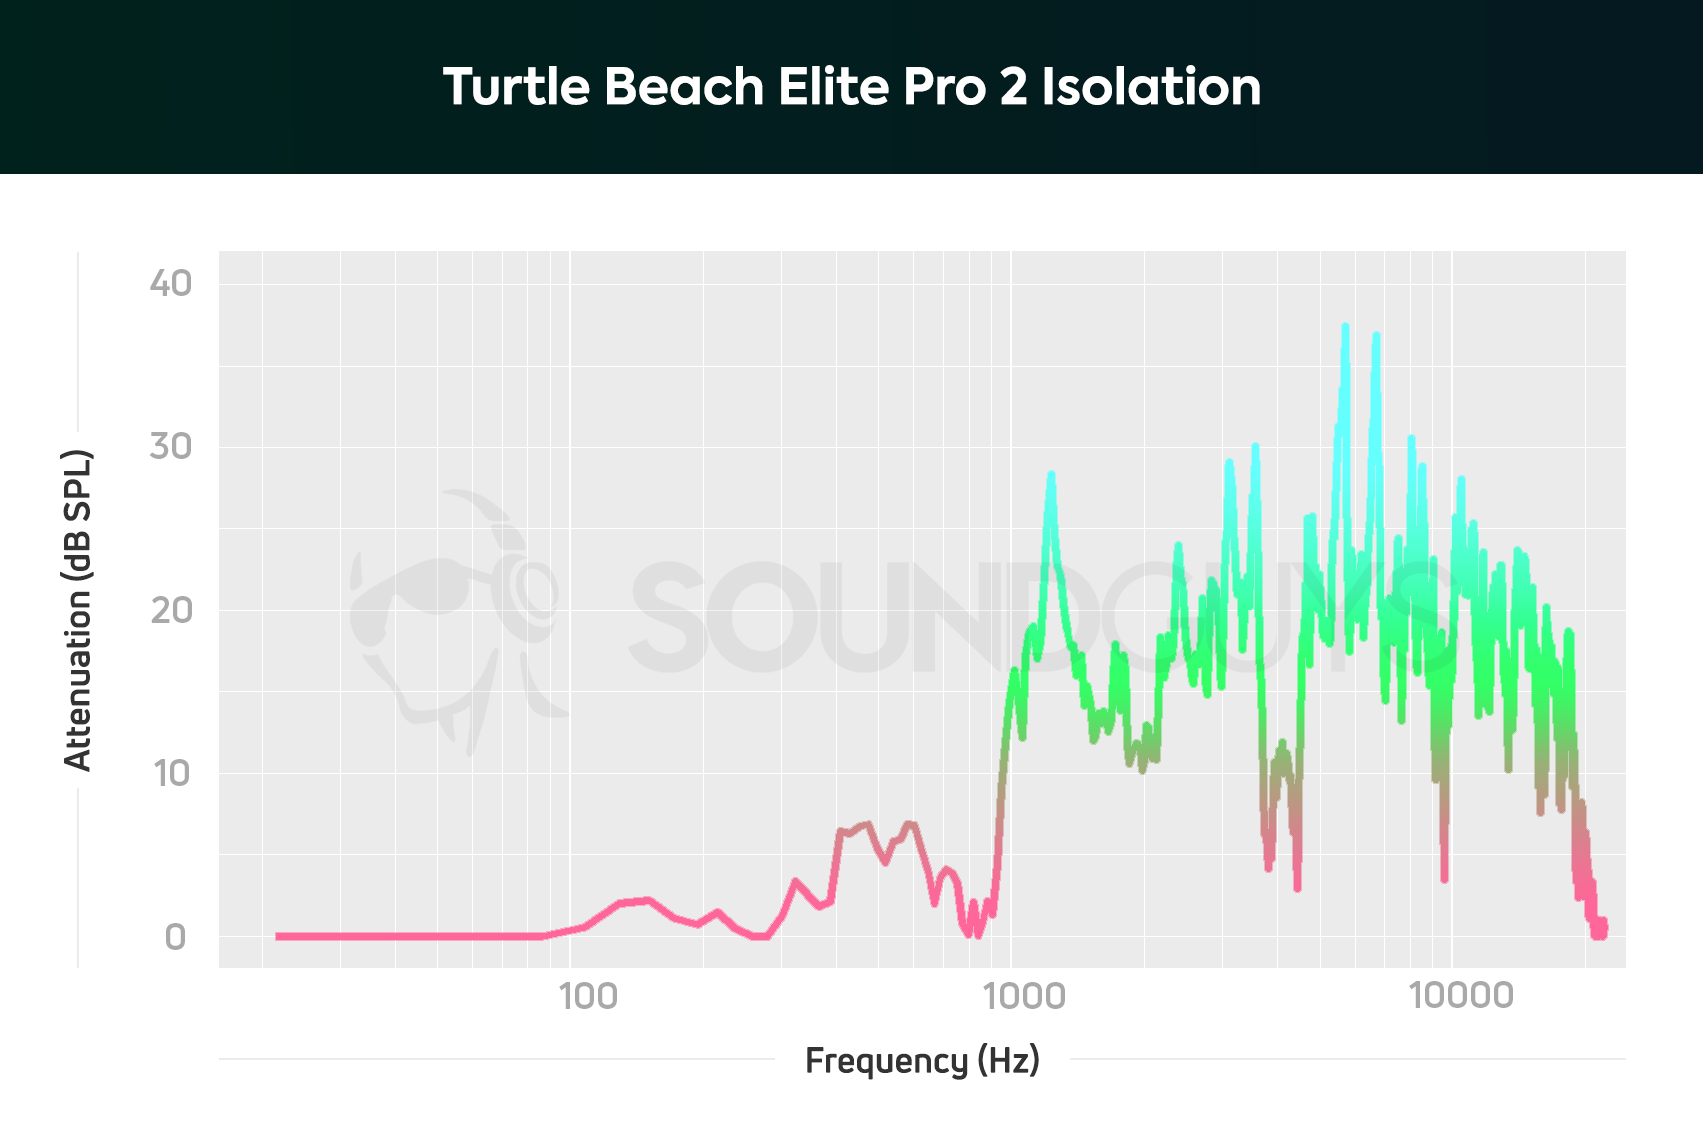 An isolation chart for The Turtle Beach Elite Pro 2 gaming headset, which shows pretty average isolation for a gaming headset